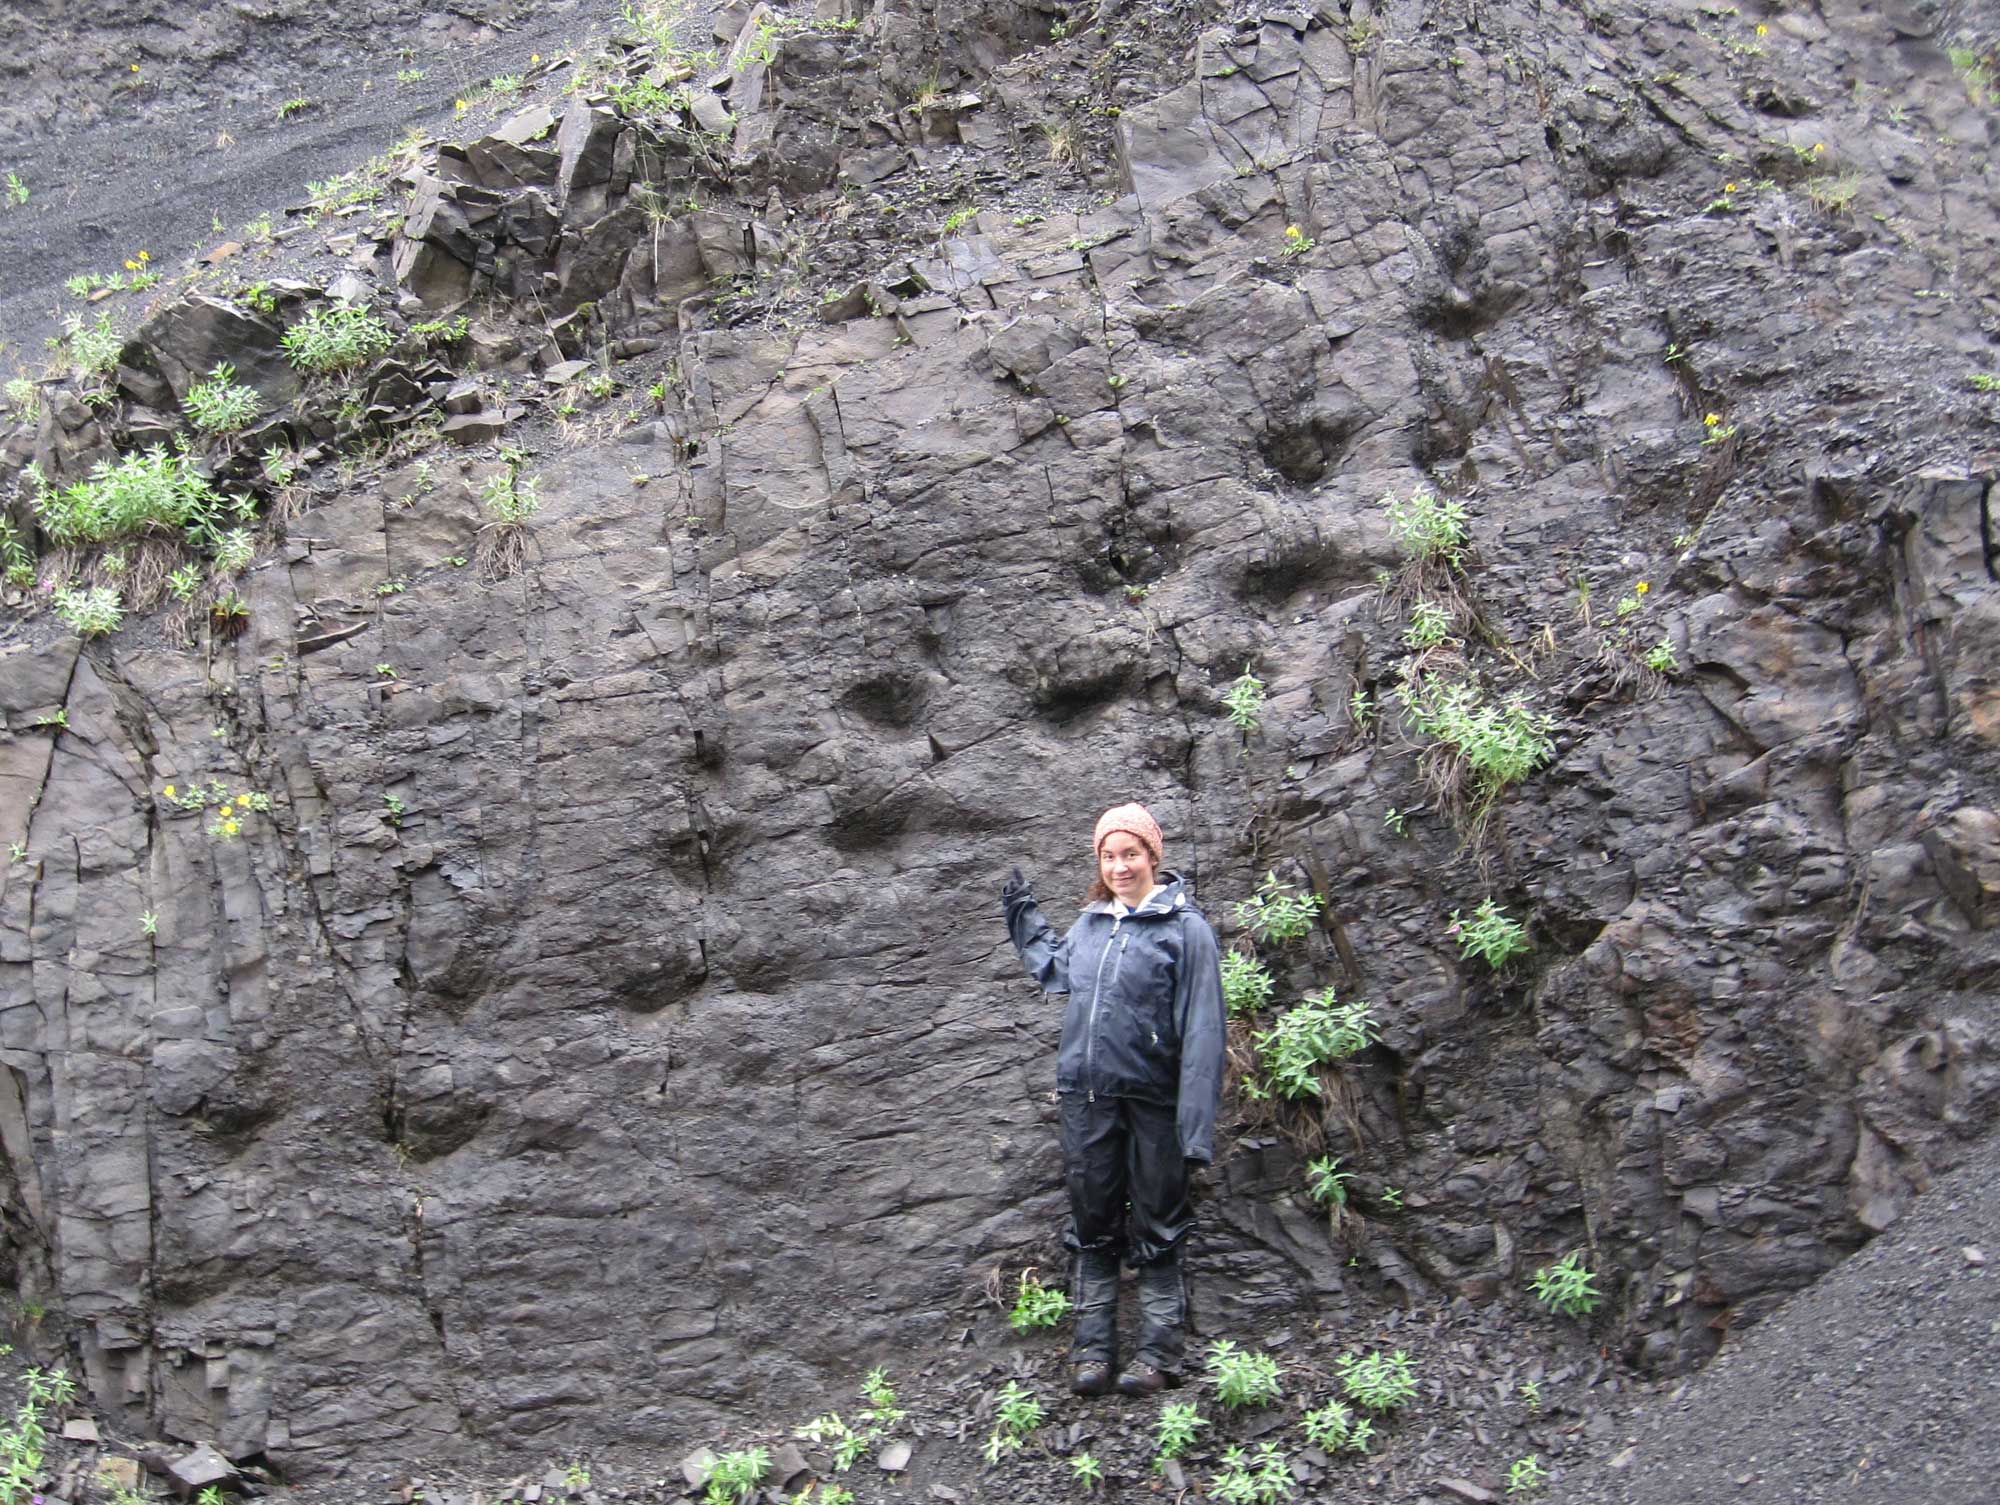 Photograph of a Cretaceous fossil trackway at Denali National Park. The trackway is preserved as a series of depression in two rows on a vertical gray rock face. A young woman stands in front of the trackway, pointing upward at it. 